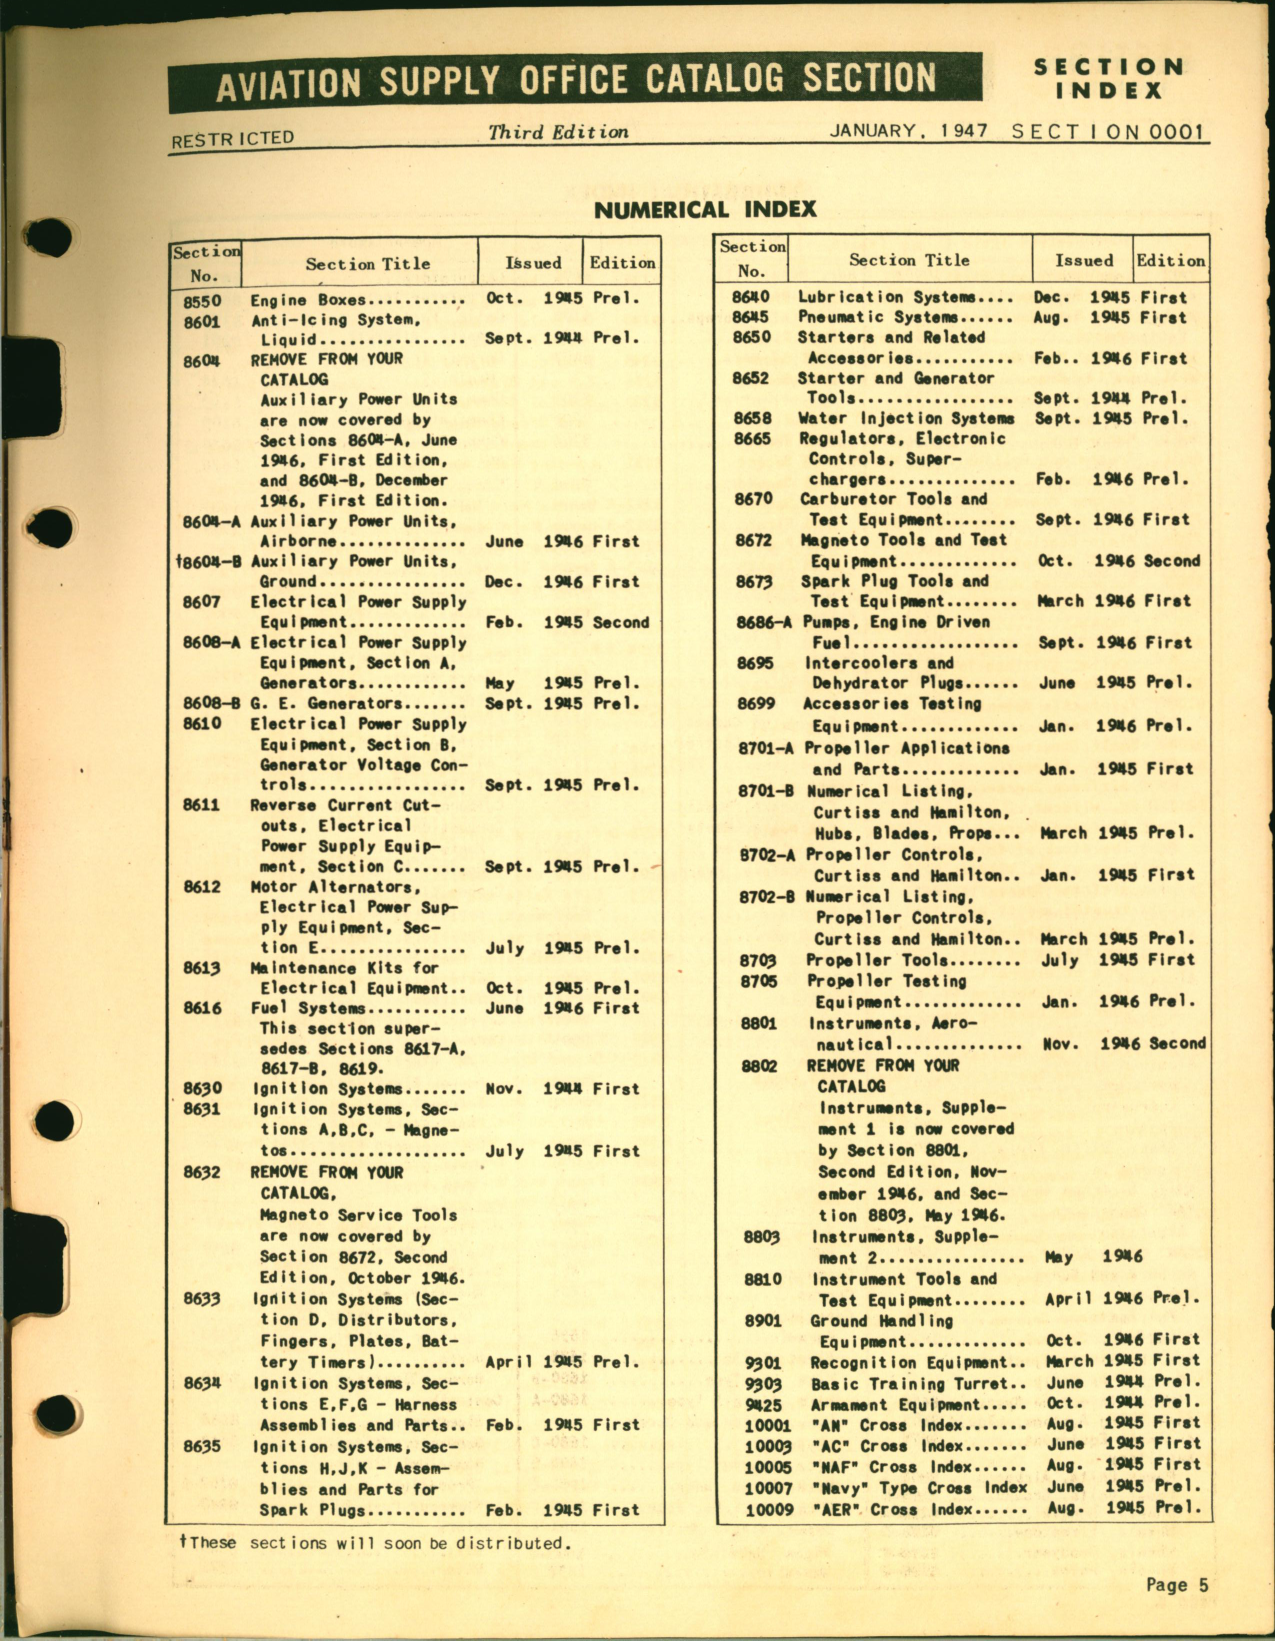 Sample page 5 from AirCorps Library document: Section Index